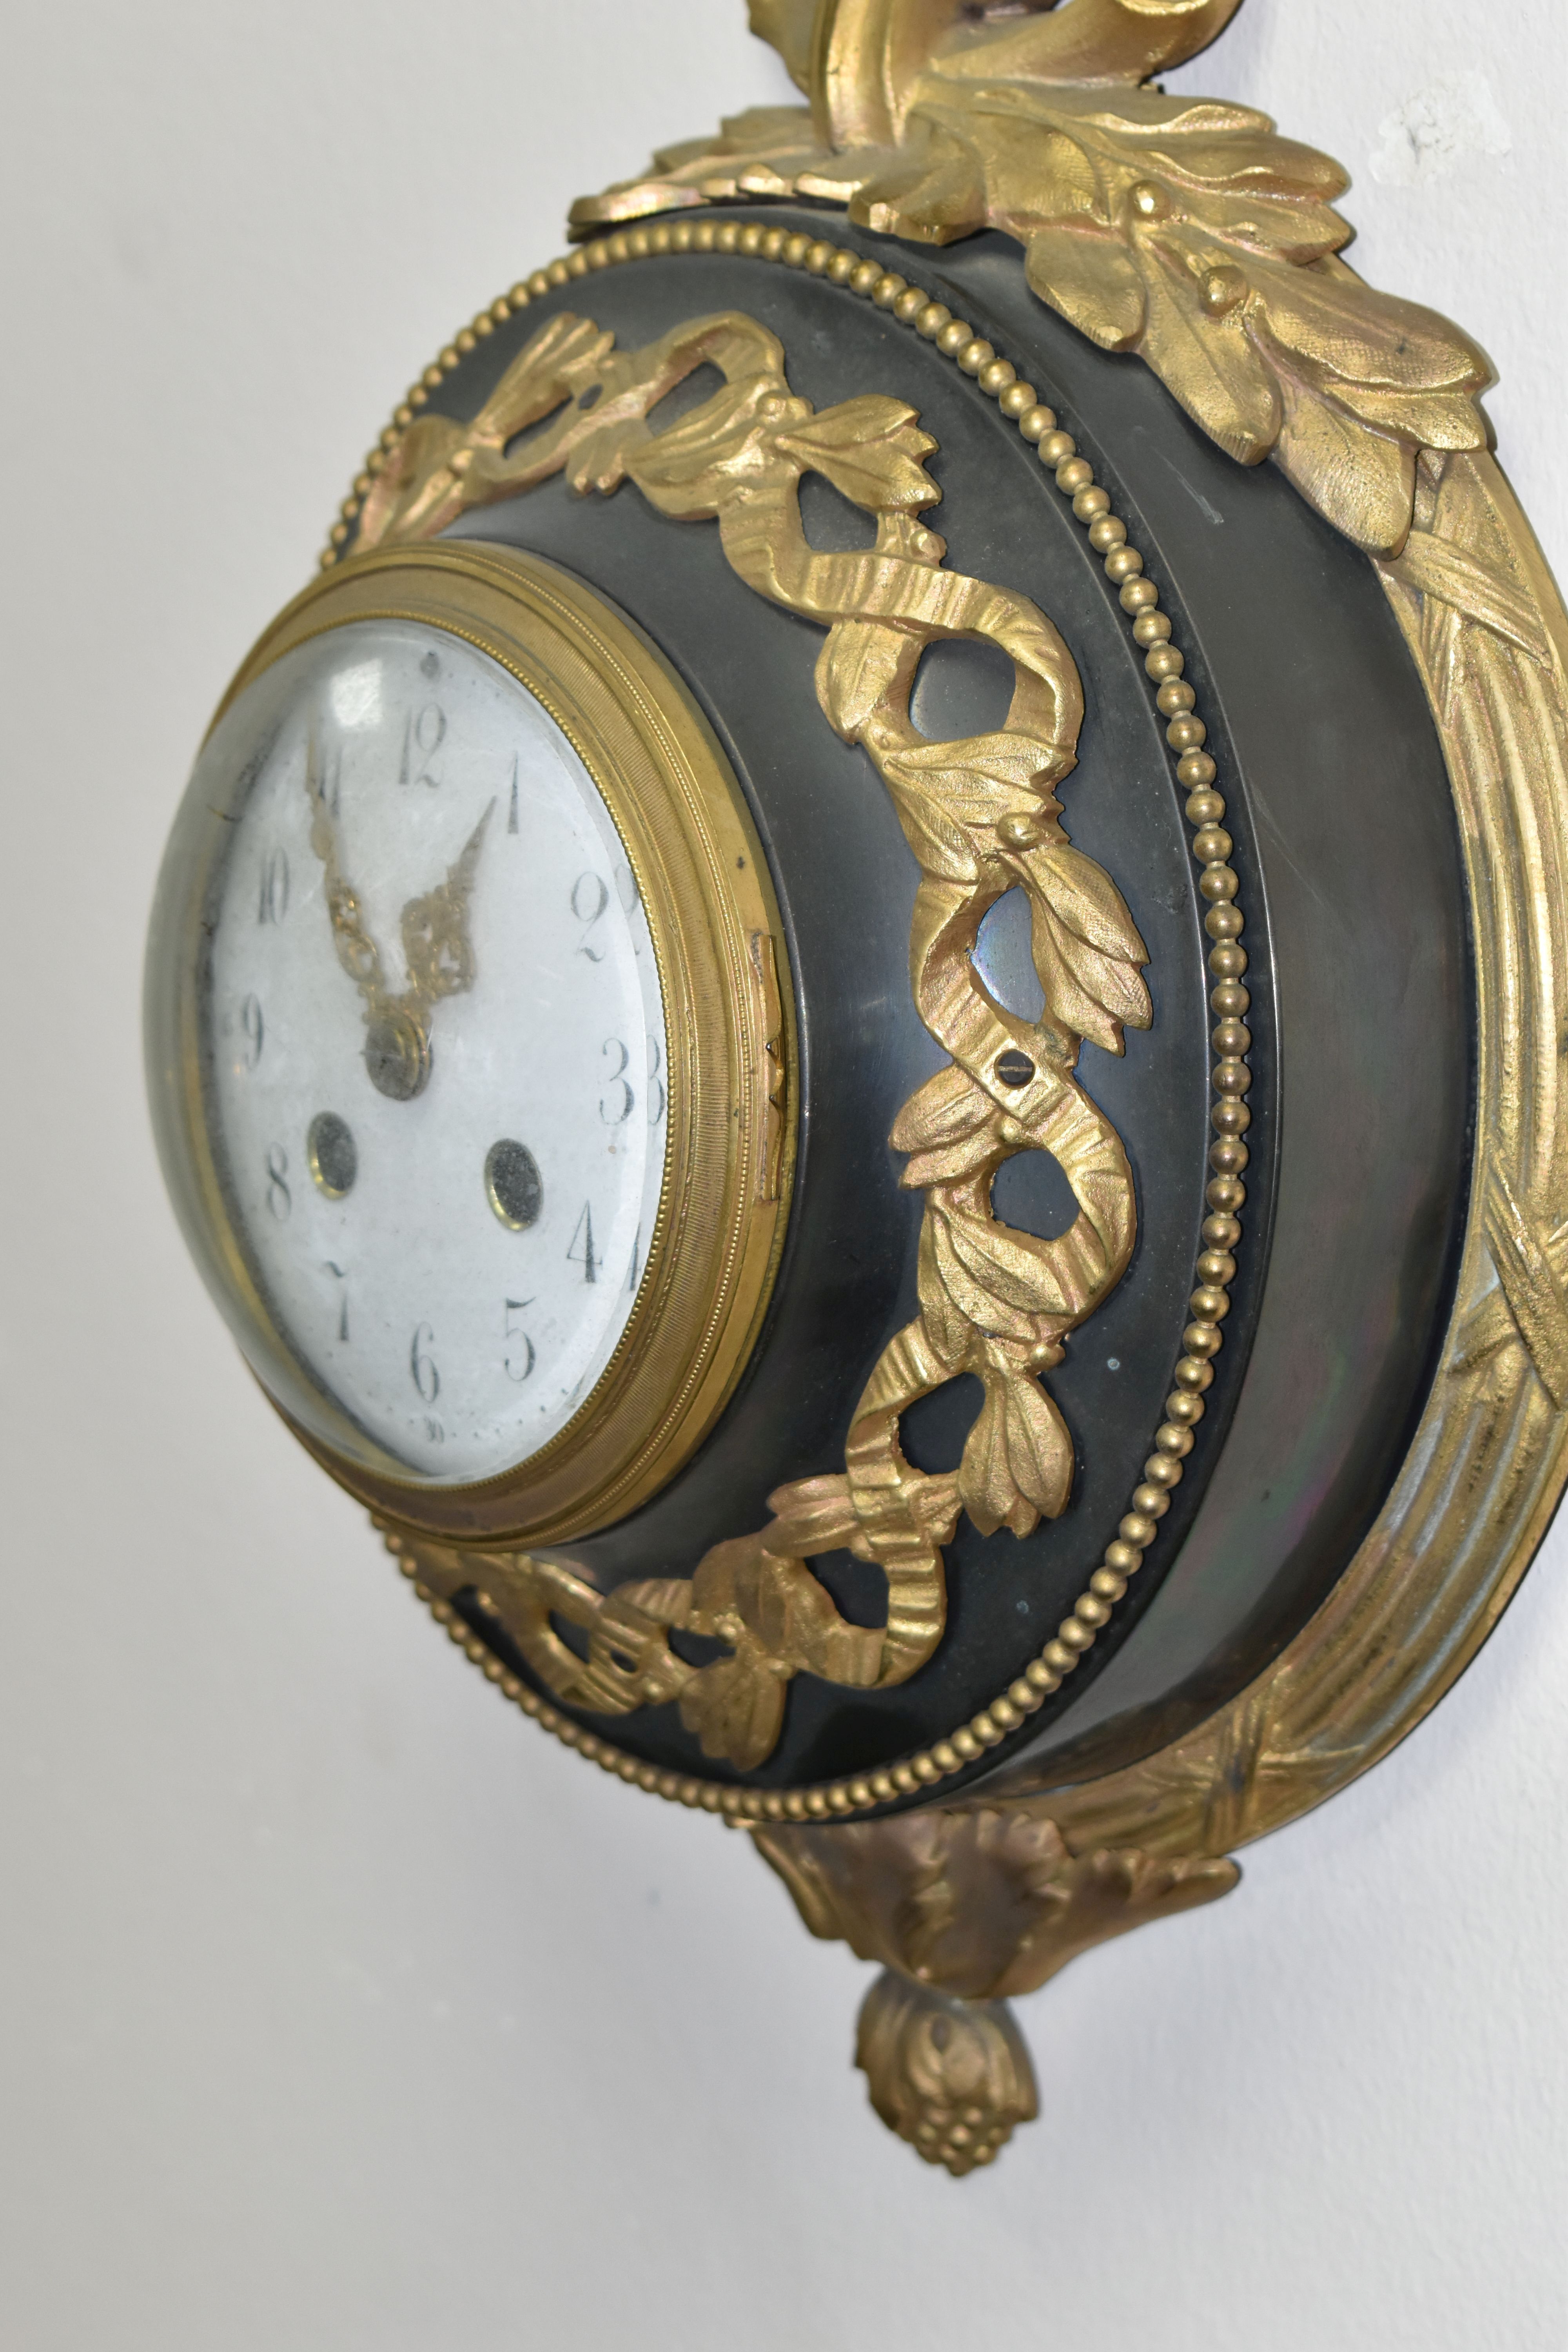 A LATE 19TH / EARLY 20TH CENTURY CARTEL CLOCK BY SAMUEL MARTI, cast gilt metal ribbon and wreath - Image 4 of 10